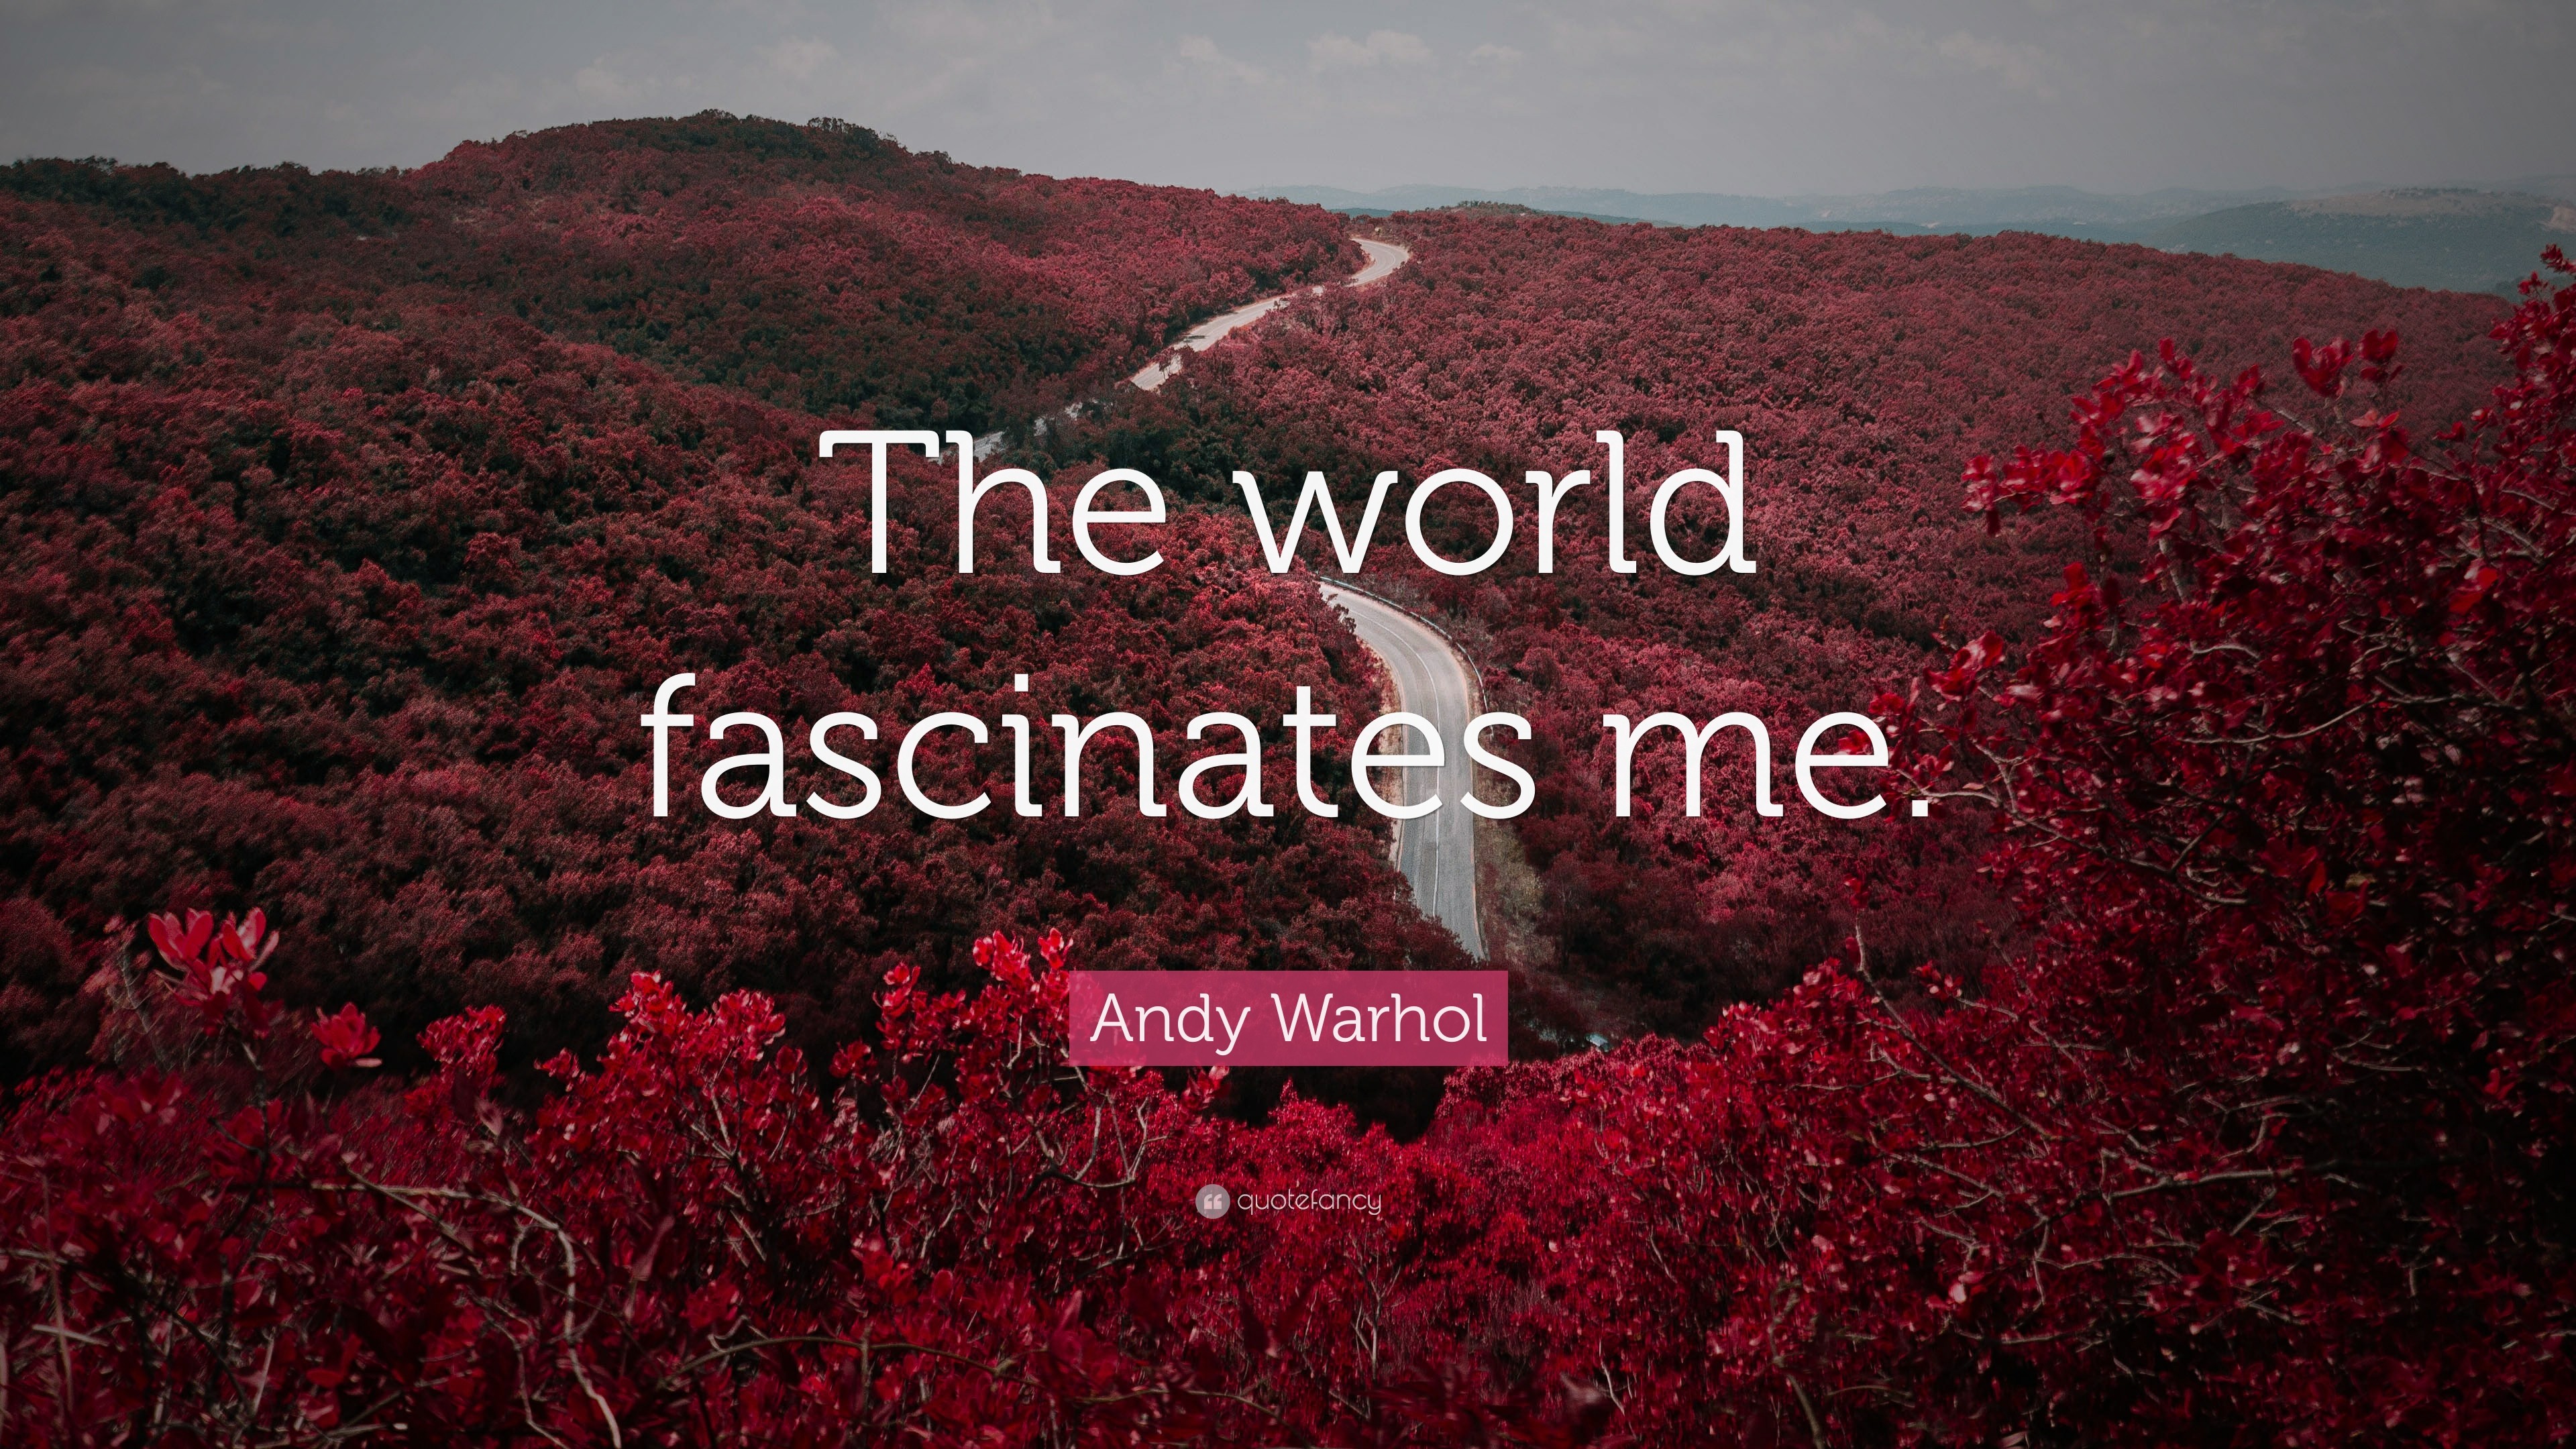 3840x2160 Andy Warhol Quote: “The world fascinates me.”